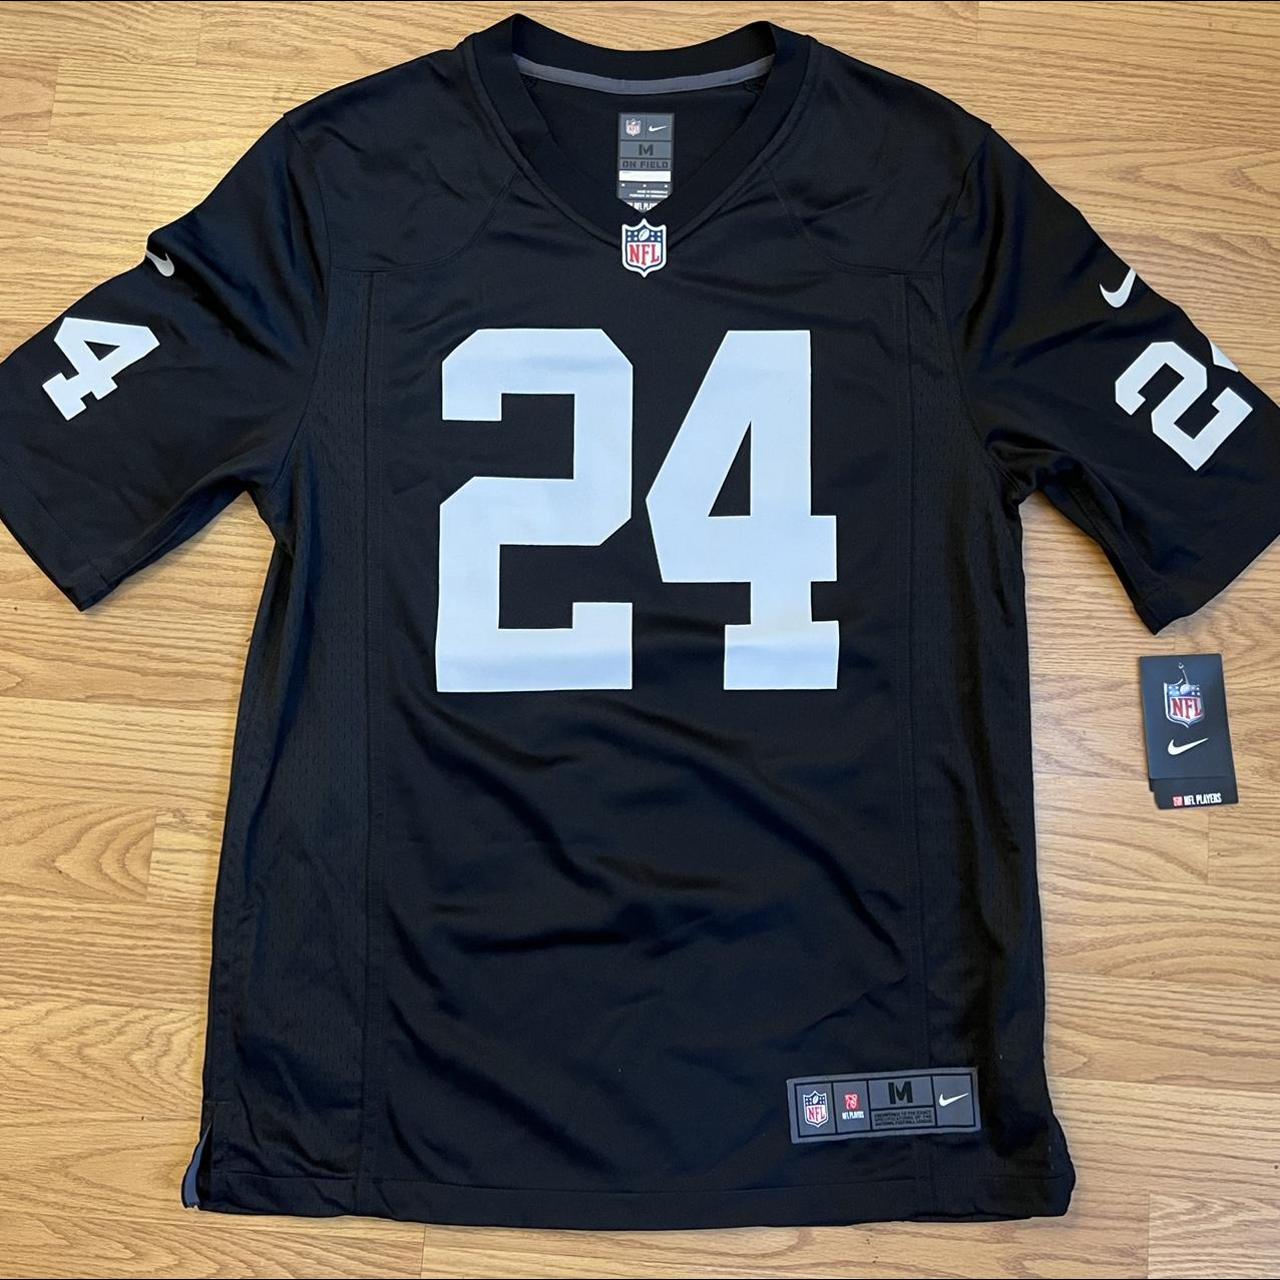 Raiders Marshawn Lynch Official Jersey by Nike. New - Depop